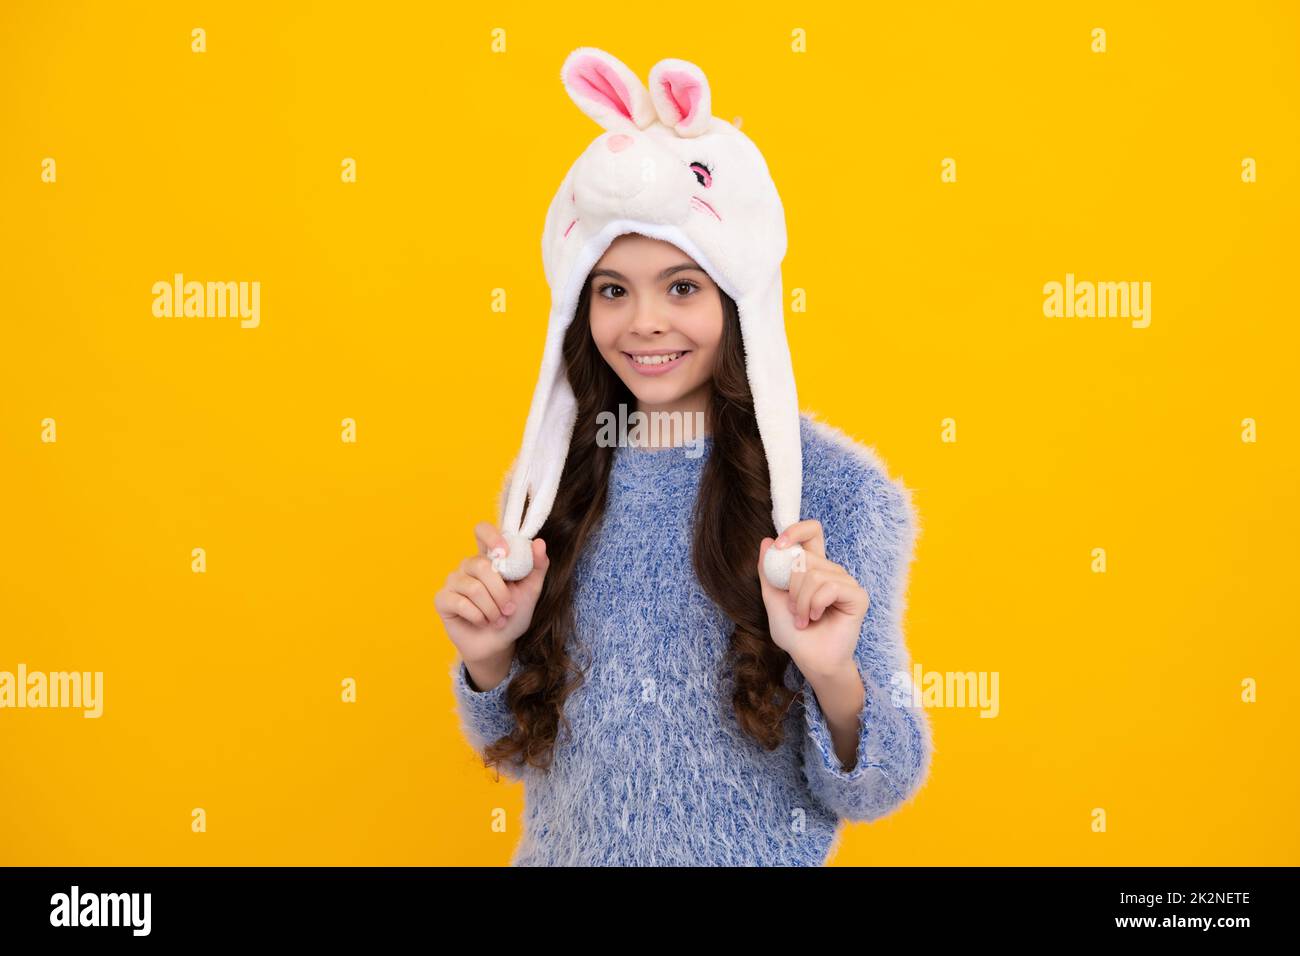 Bunny warm hat. School girl in winter clothes and warm hat. Winter holiday vacation. Child fashion model. Happy teenager, positive and smiling Stock Photo